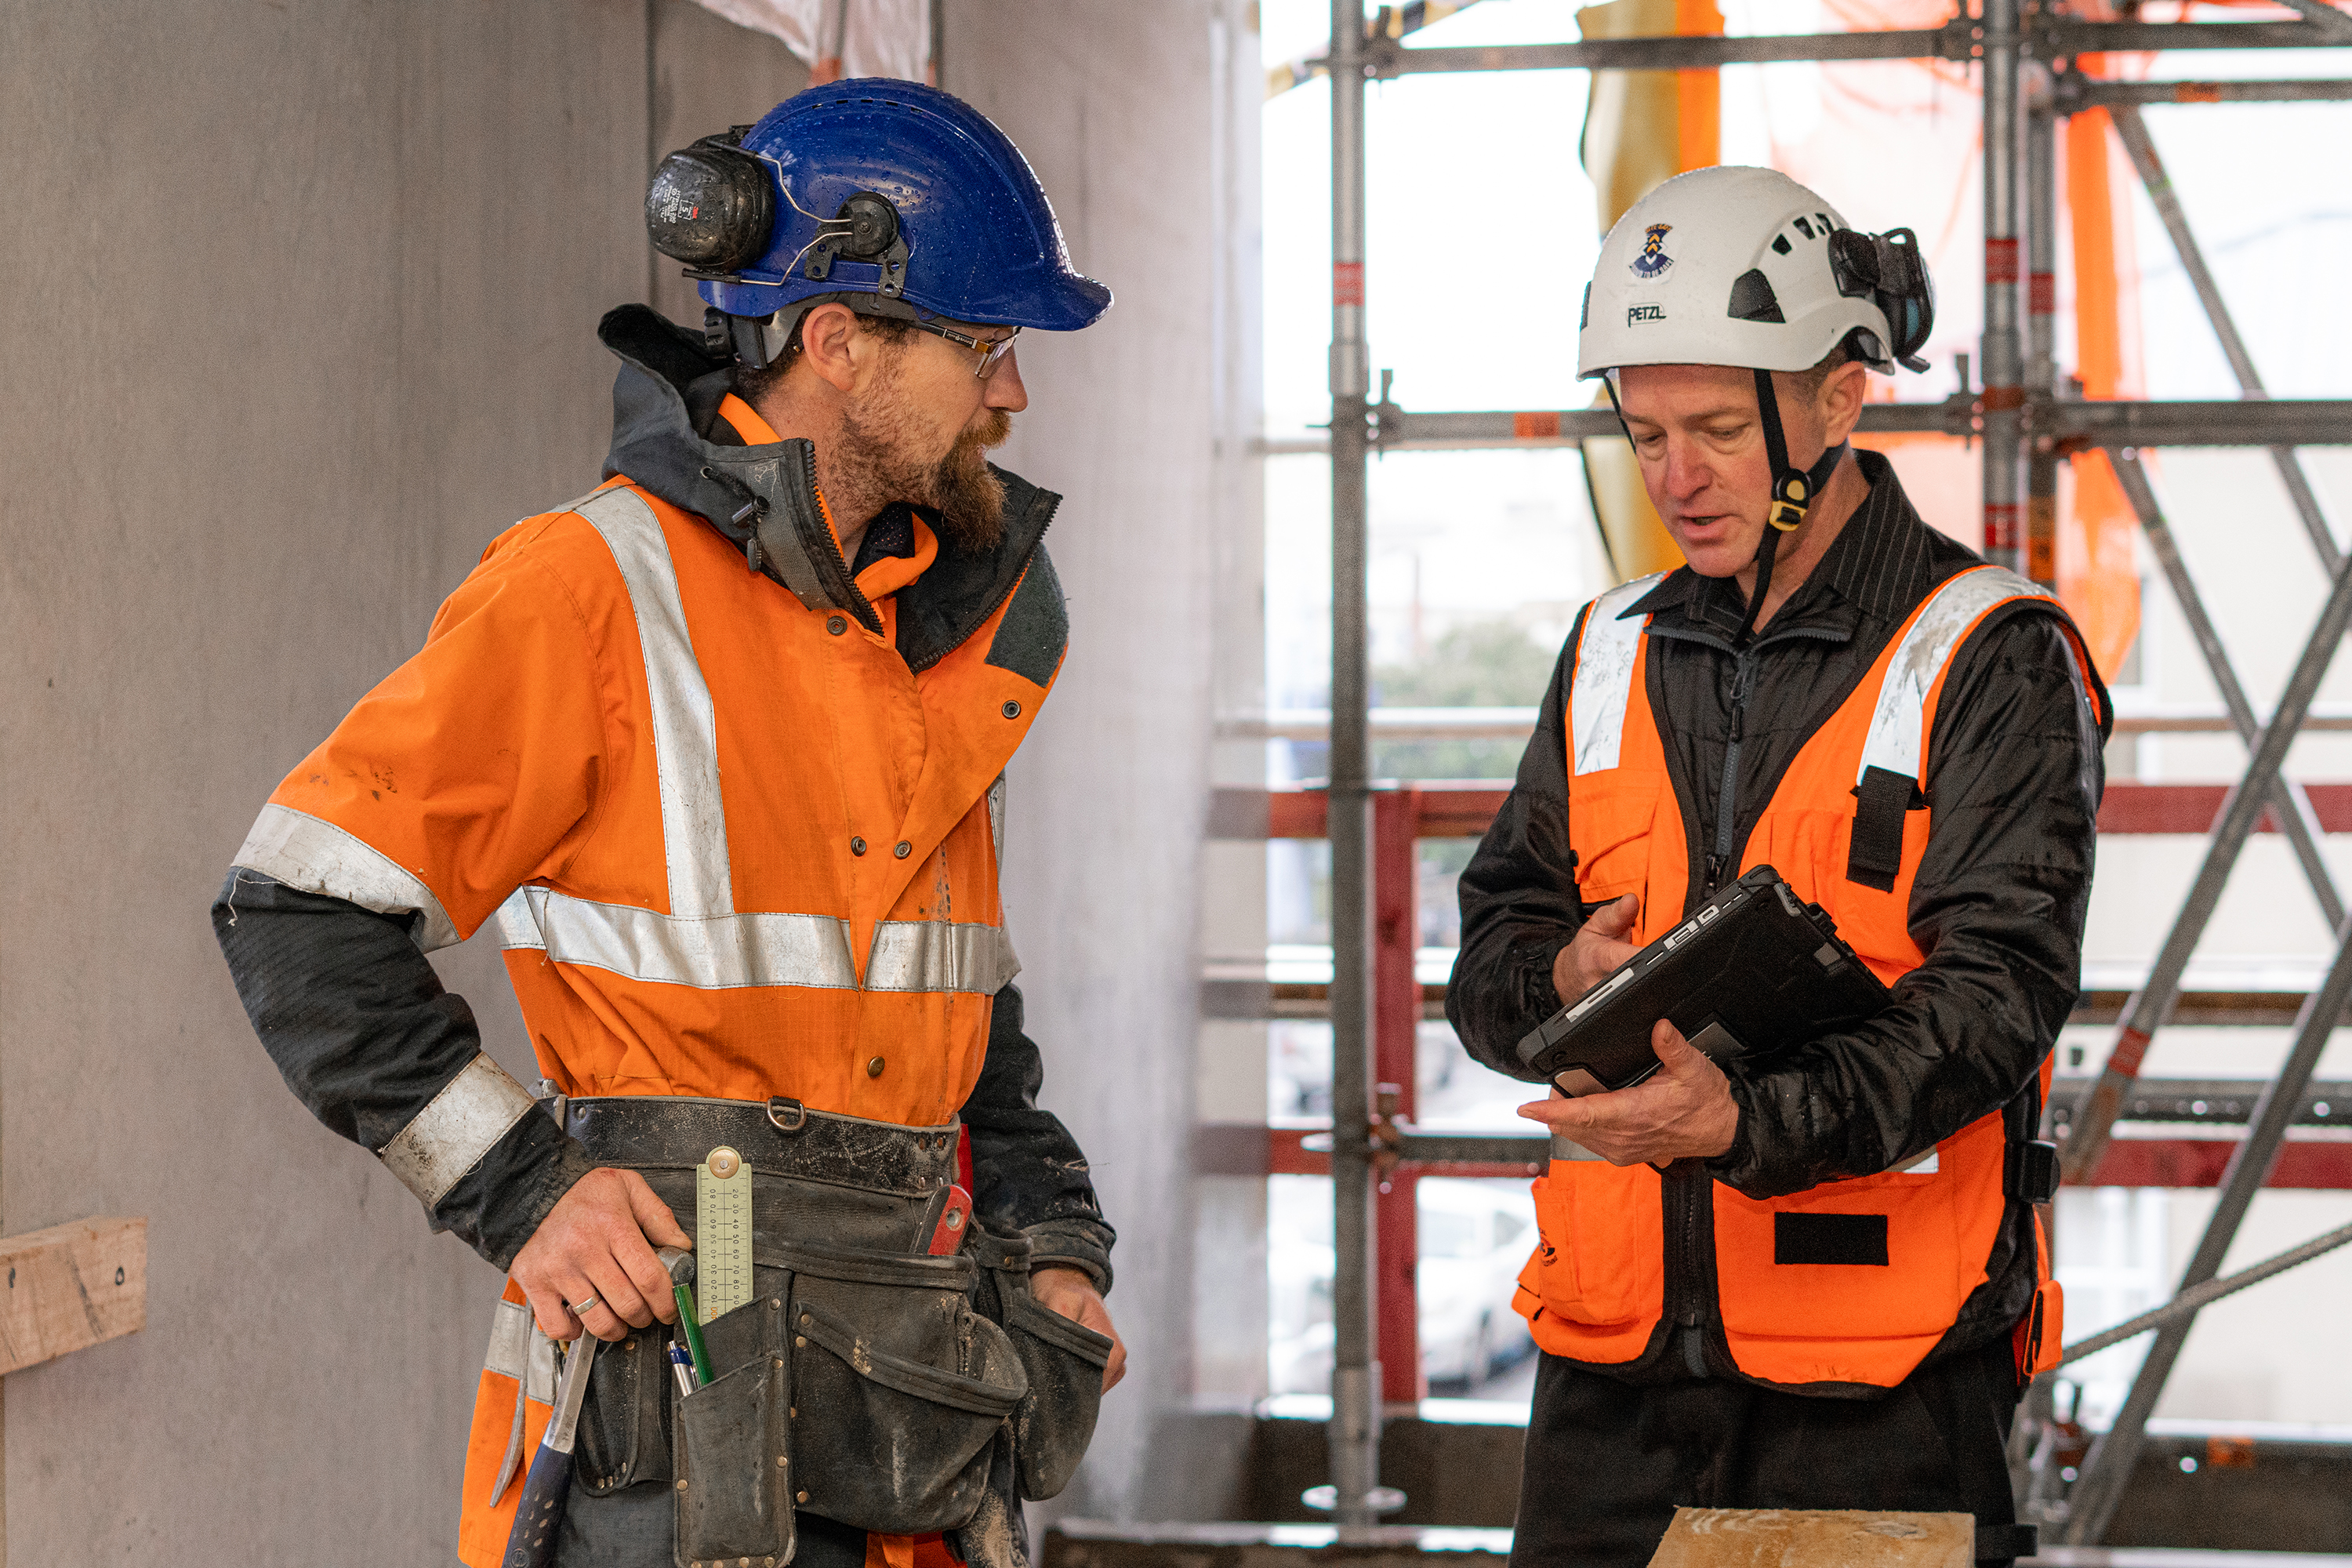 Health and safety site reviews crucial tool for wellbeing of construction industry image